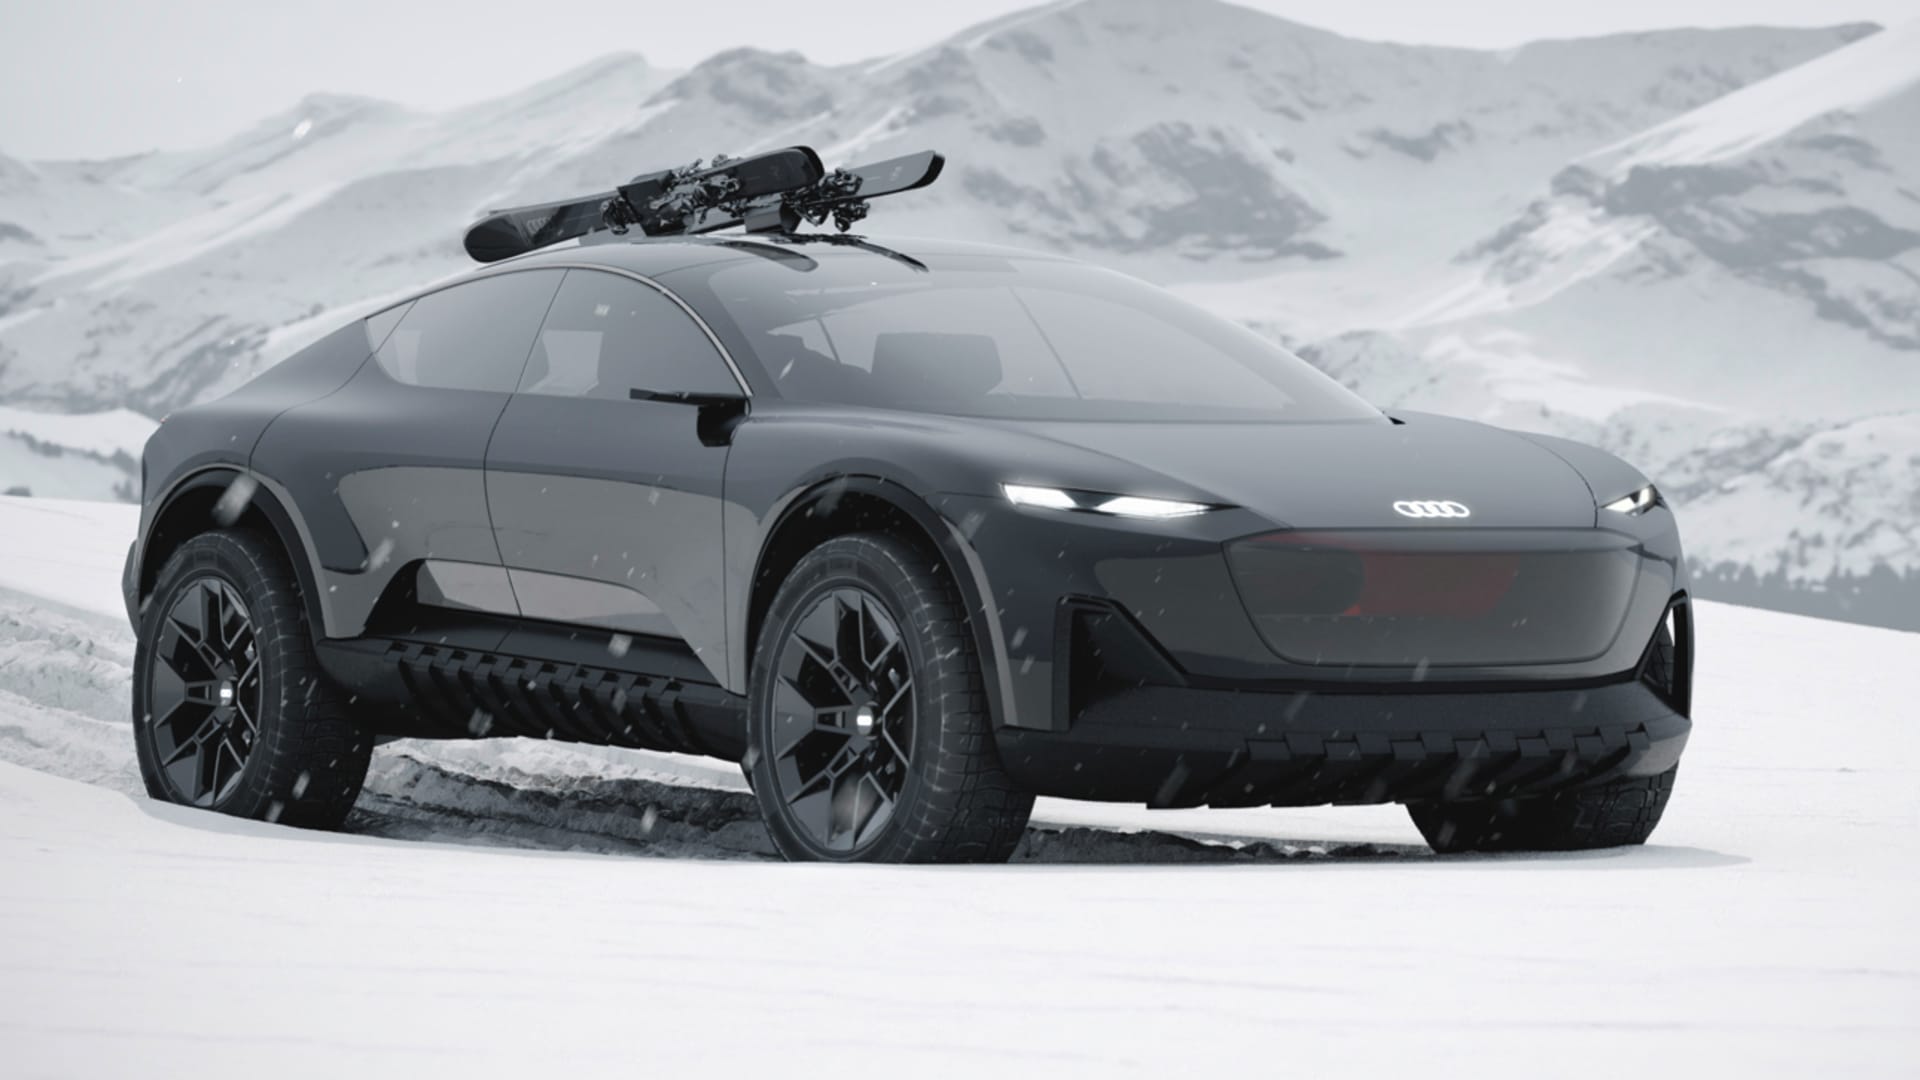 Audi's new EV is a luxury SUV with augmented reality that doubles as a